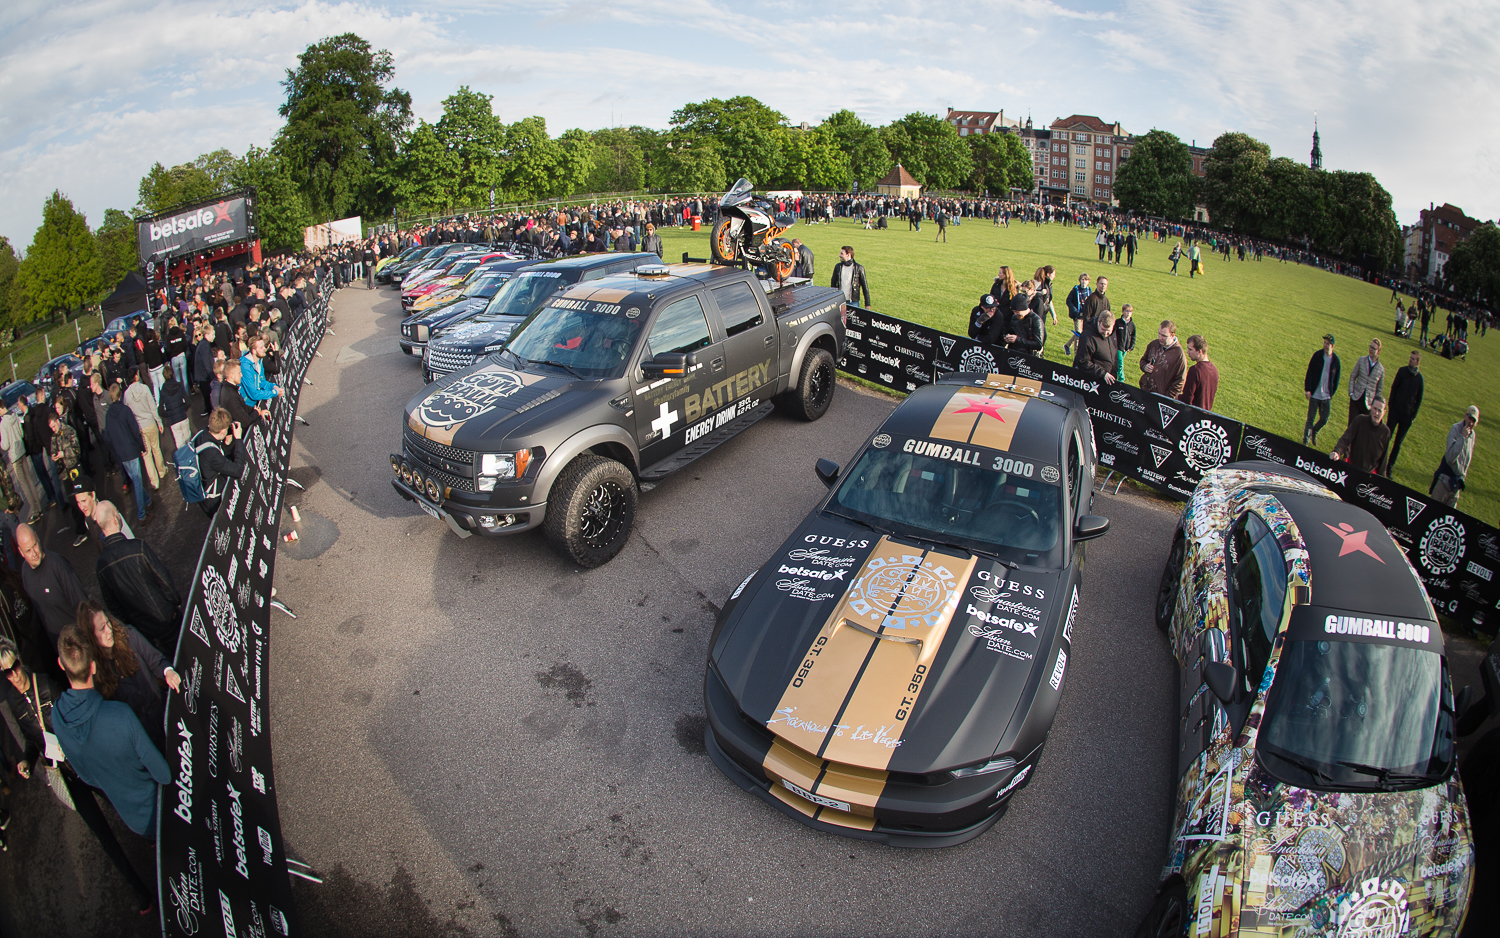 SMoores_15-05-25_Gumball 3000 Day 2_0407-Edit.jpg